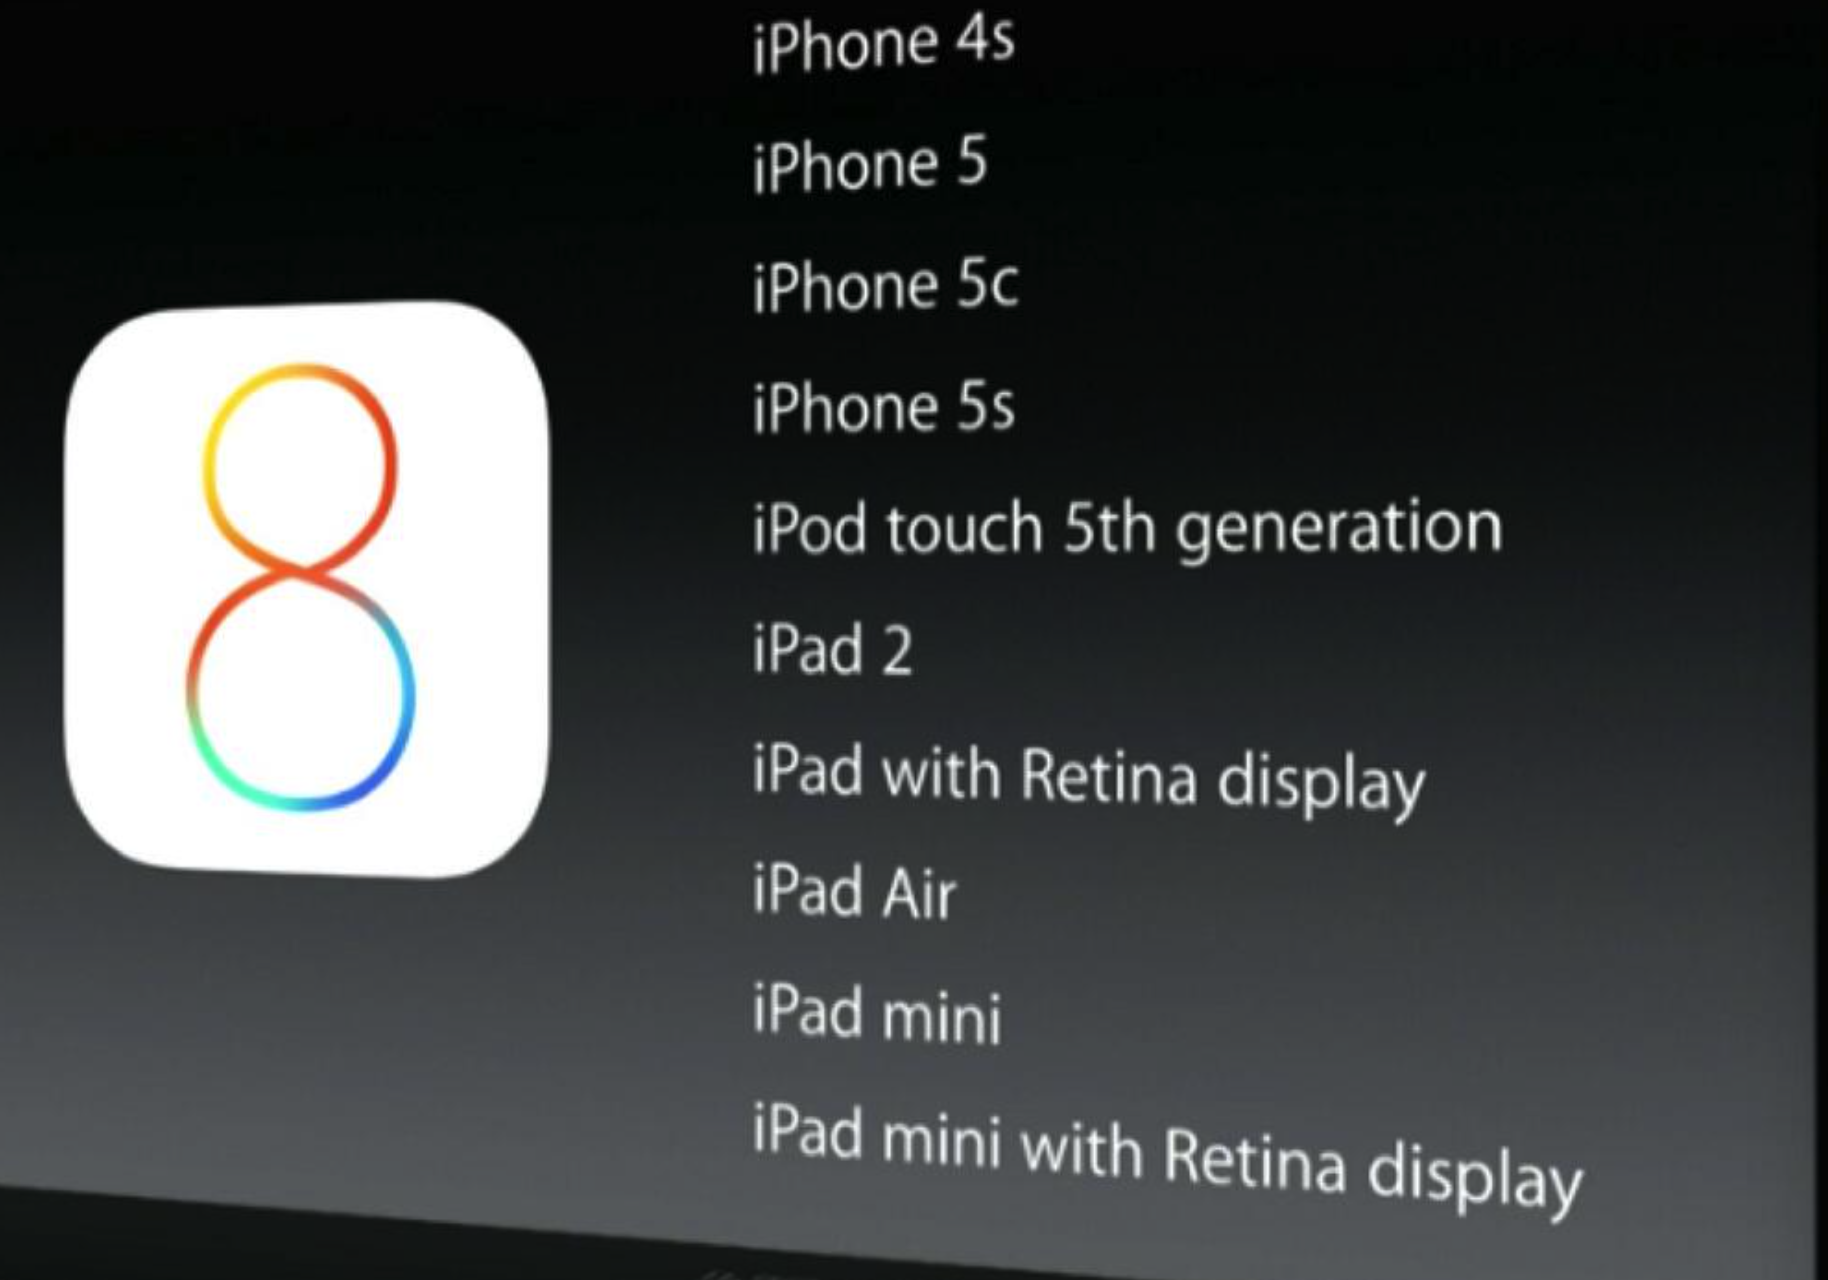 Apple Announces Ios 8 Device Compatibility Drops Support For Iphone 4 9to5mac